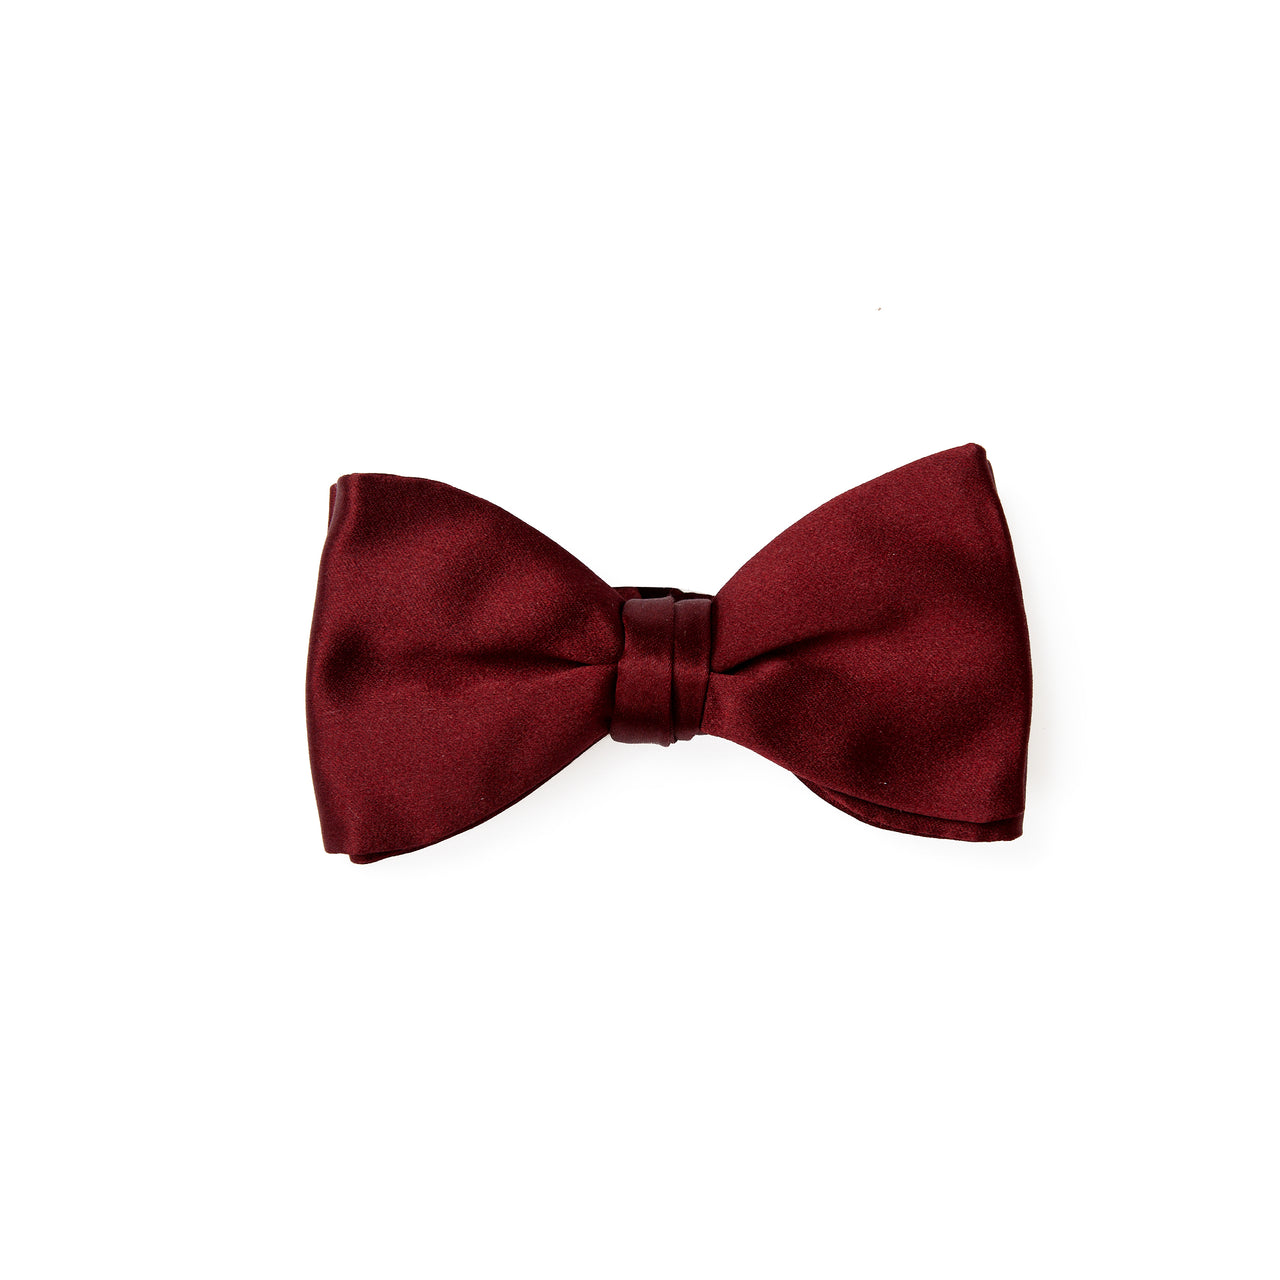 HENRY SARTORIAL x HEMLEY Knitted Bow Tie RED